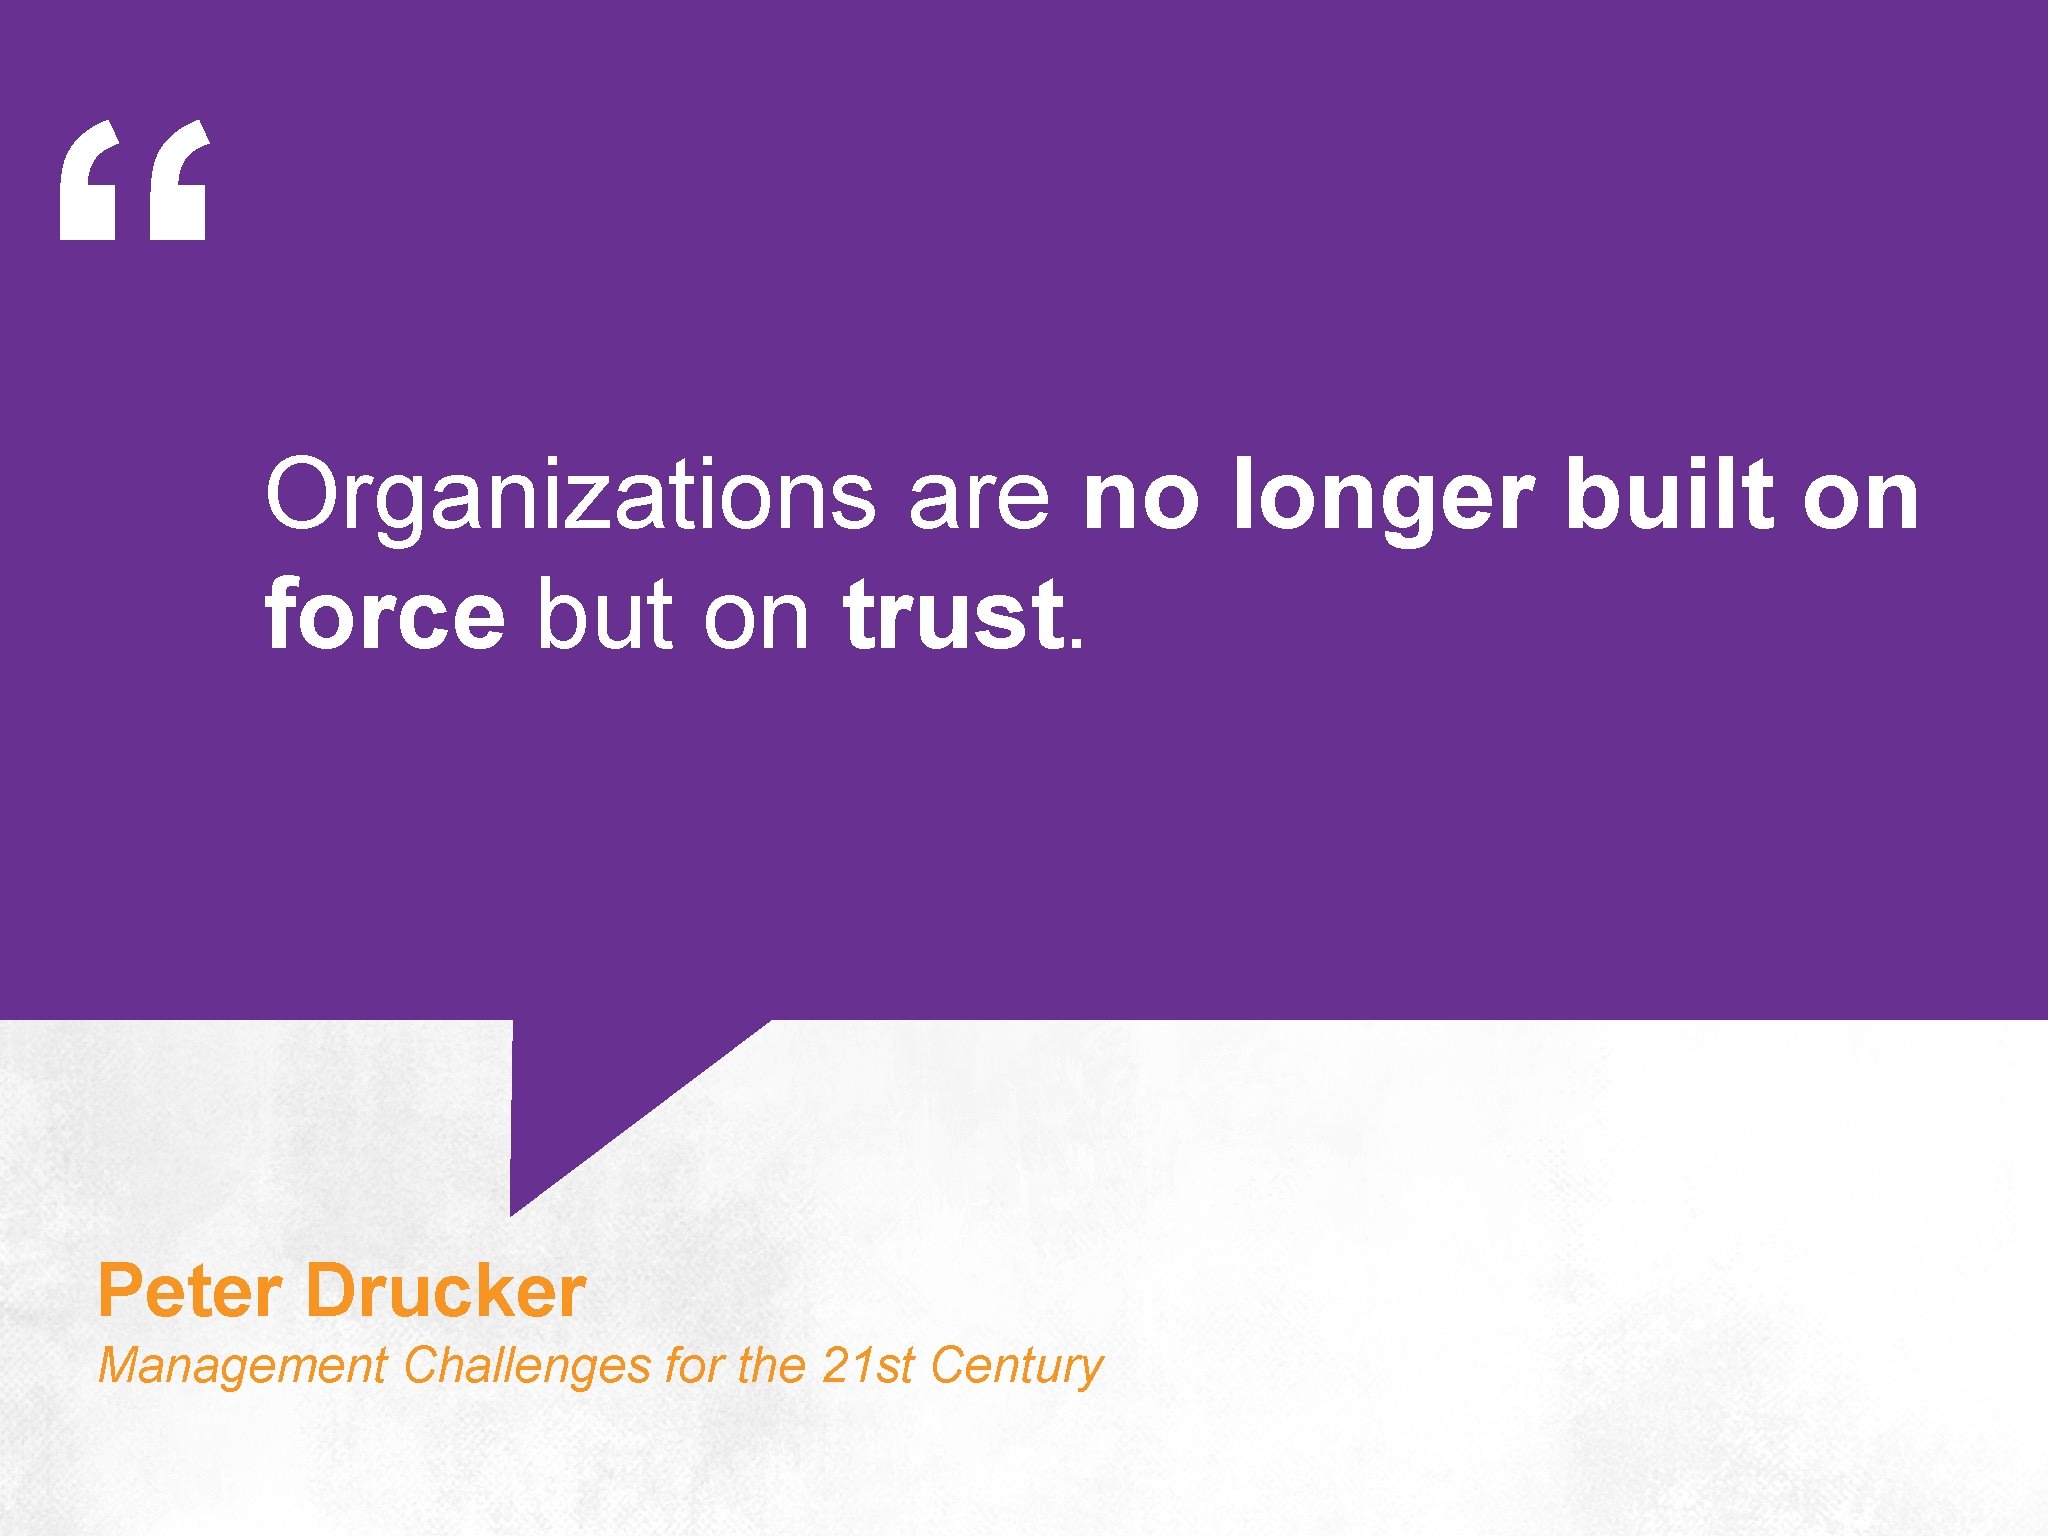 “ Organizations are no longer built on force but on trust. Peter Drucker Management